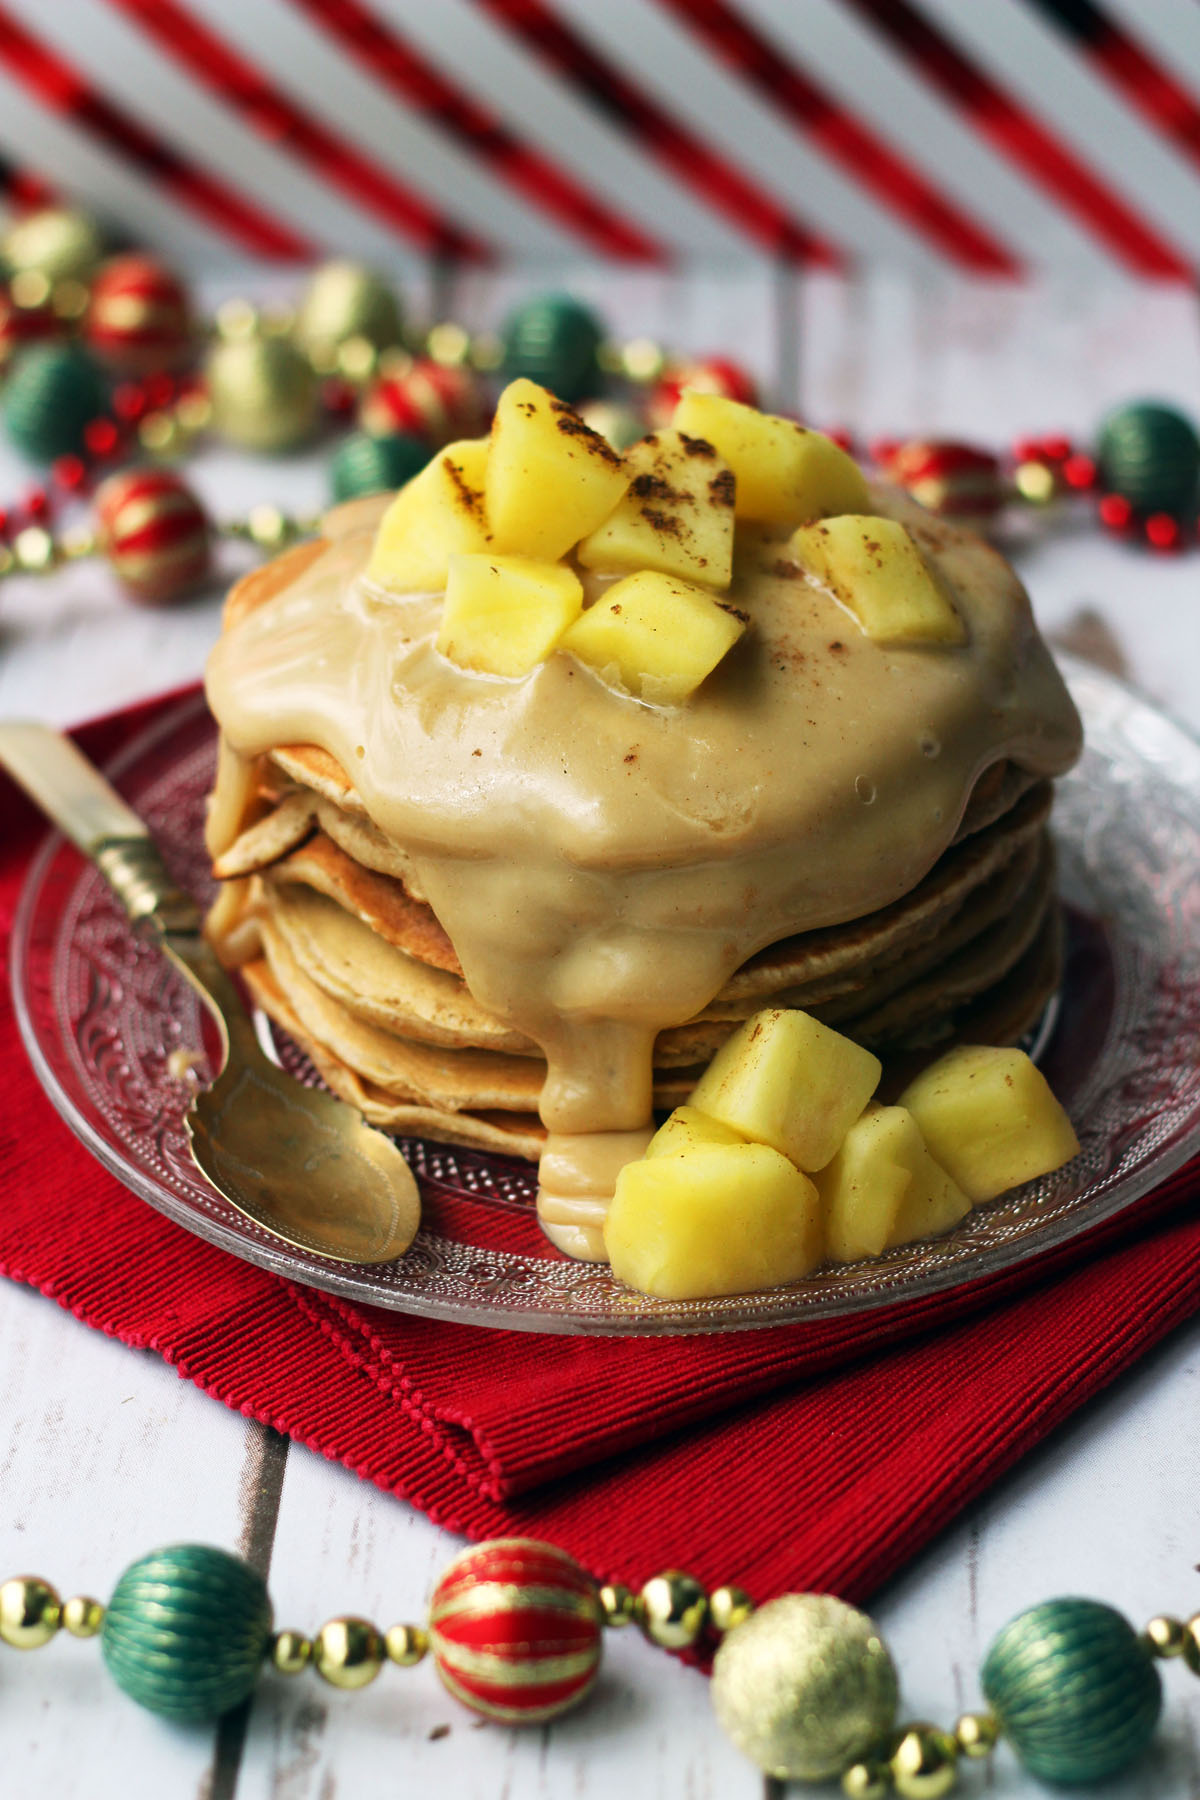 Breakfast just got festive check out these cinmmaon and apple pancakes with caramel sauce from Supper in the Suburbs